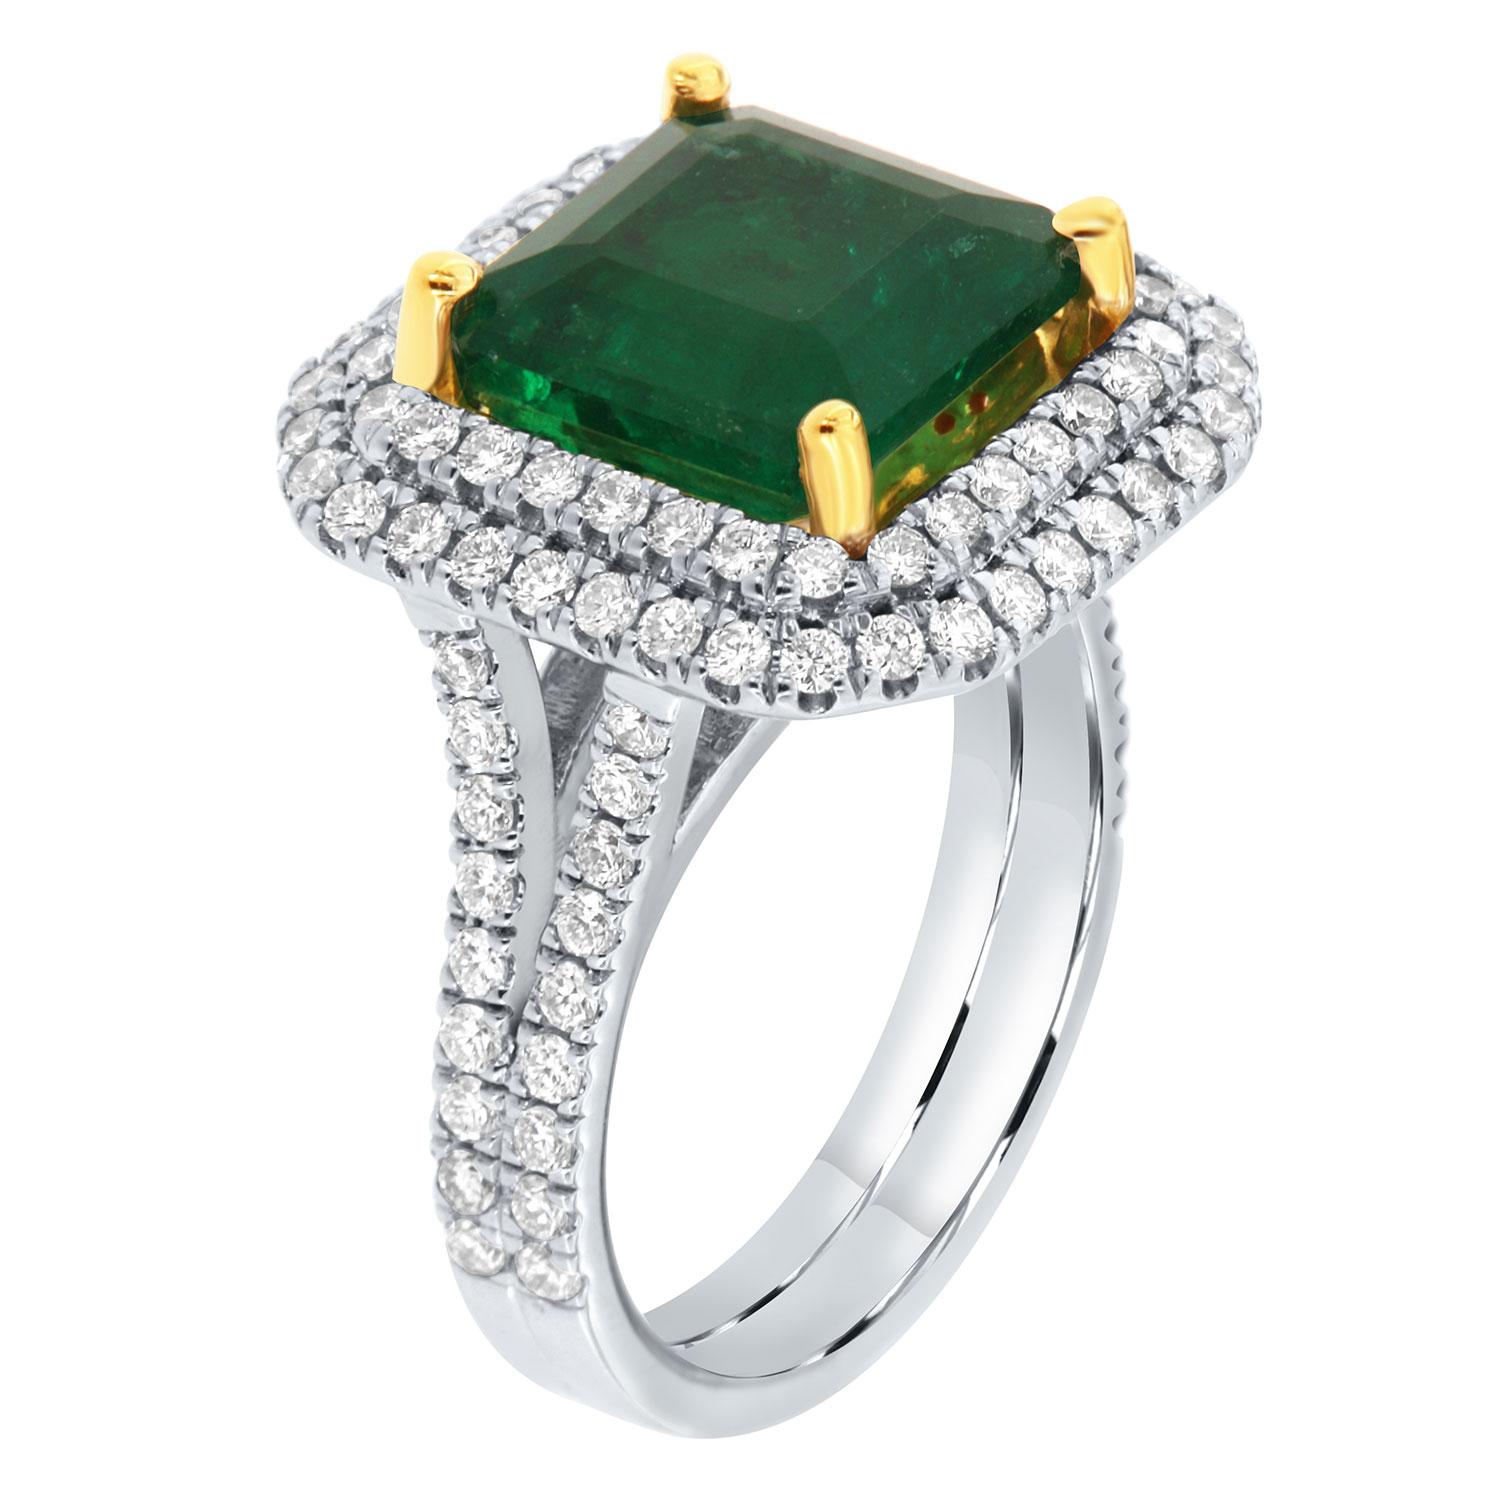 This 14K White and Yellow gold ring feature a 5.20 - Carat Asscher cut Natural Green Emerald from Zambia in a bright green color. The emerald is encircled by a double halo of brilliant round diamonds on a two rows split shank 3.7mm wide band. The